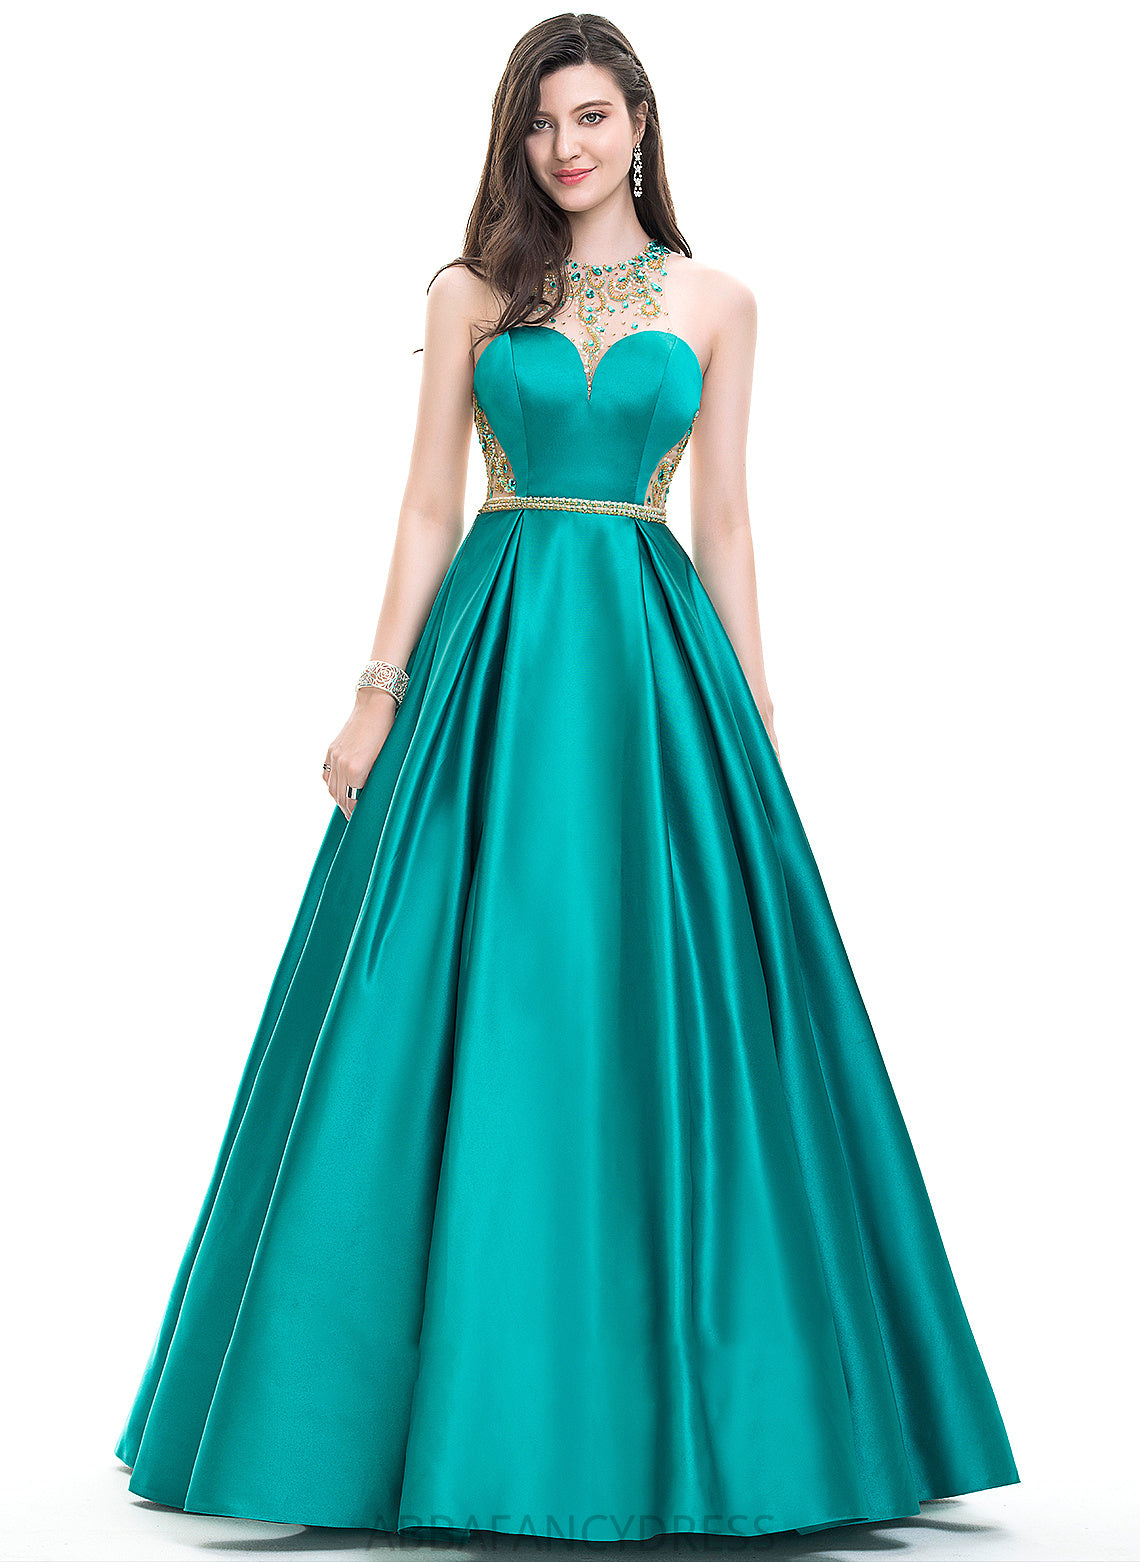 Satin Beading Ball-Gown/Princess Prom Dresses With Amy Scoop Neck Sequins Floor-Length